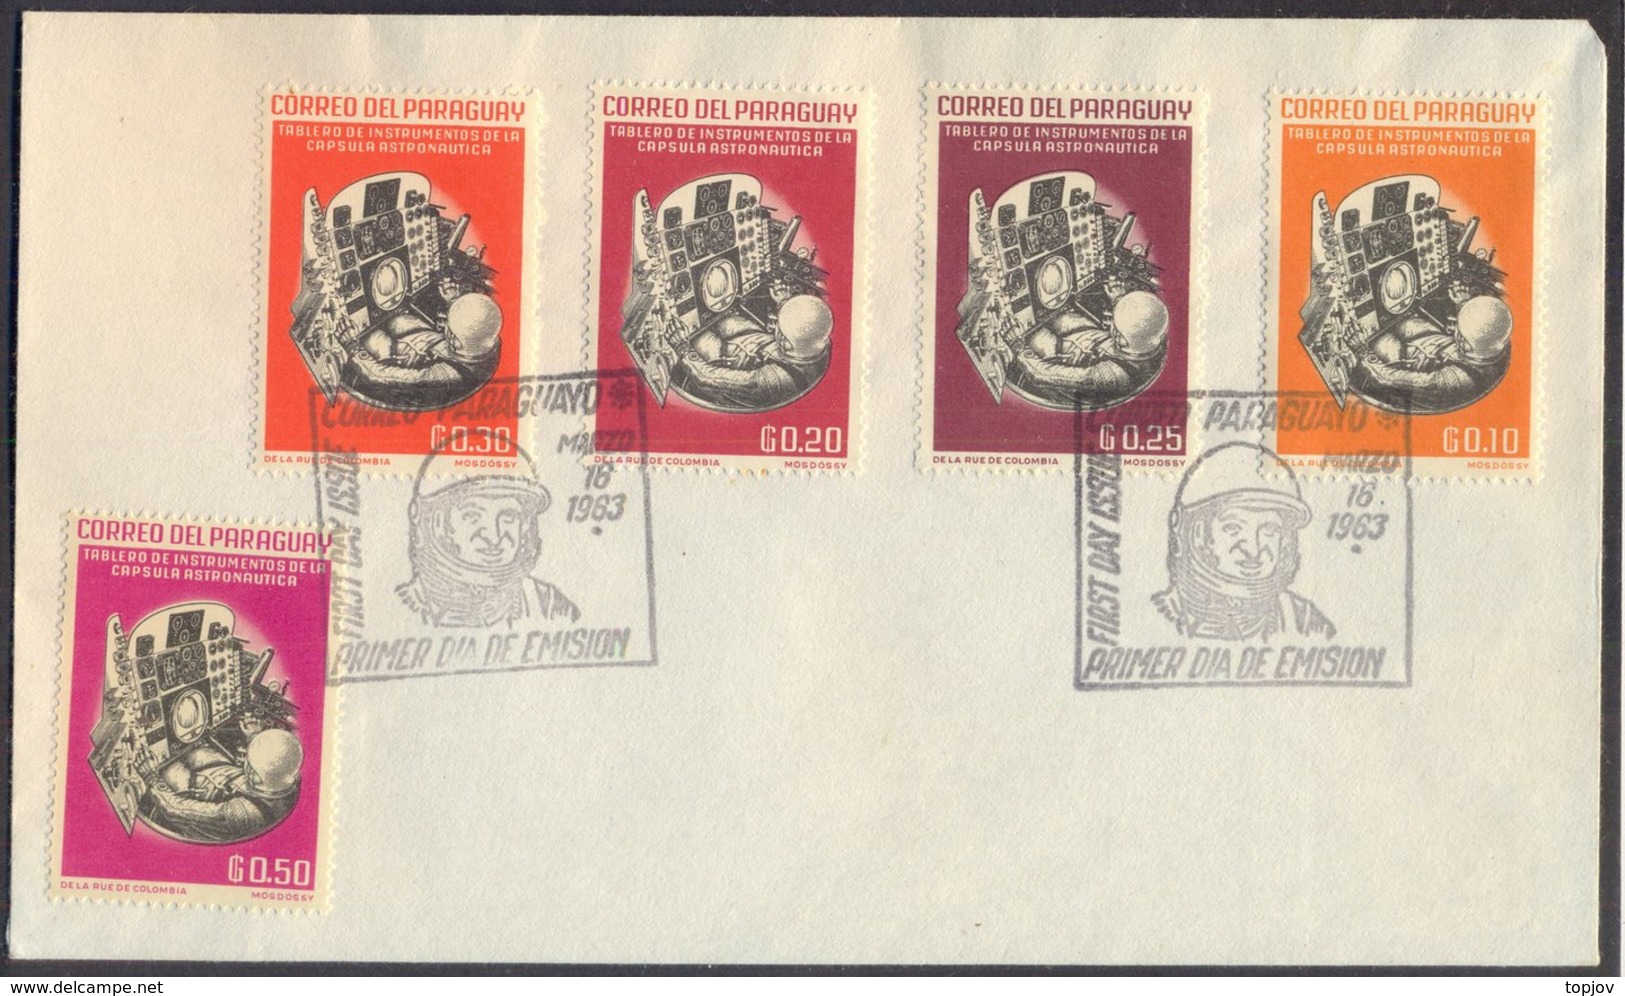 PARAGUAY - SPACE - CABIN ROCKETS - INSTRUMENTS - SCHIRRA - FDC - 1963 - Sud America